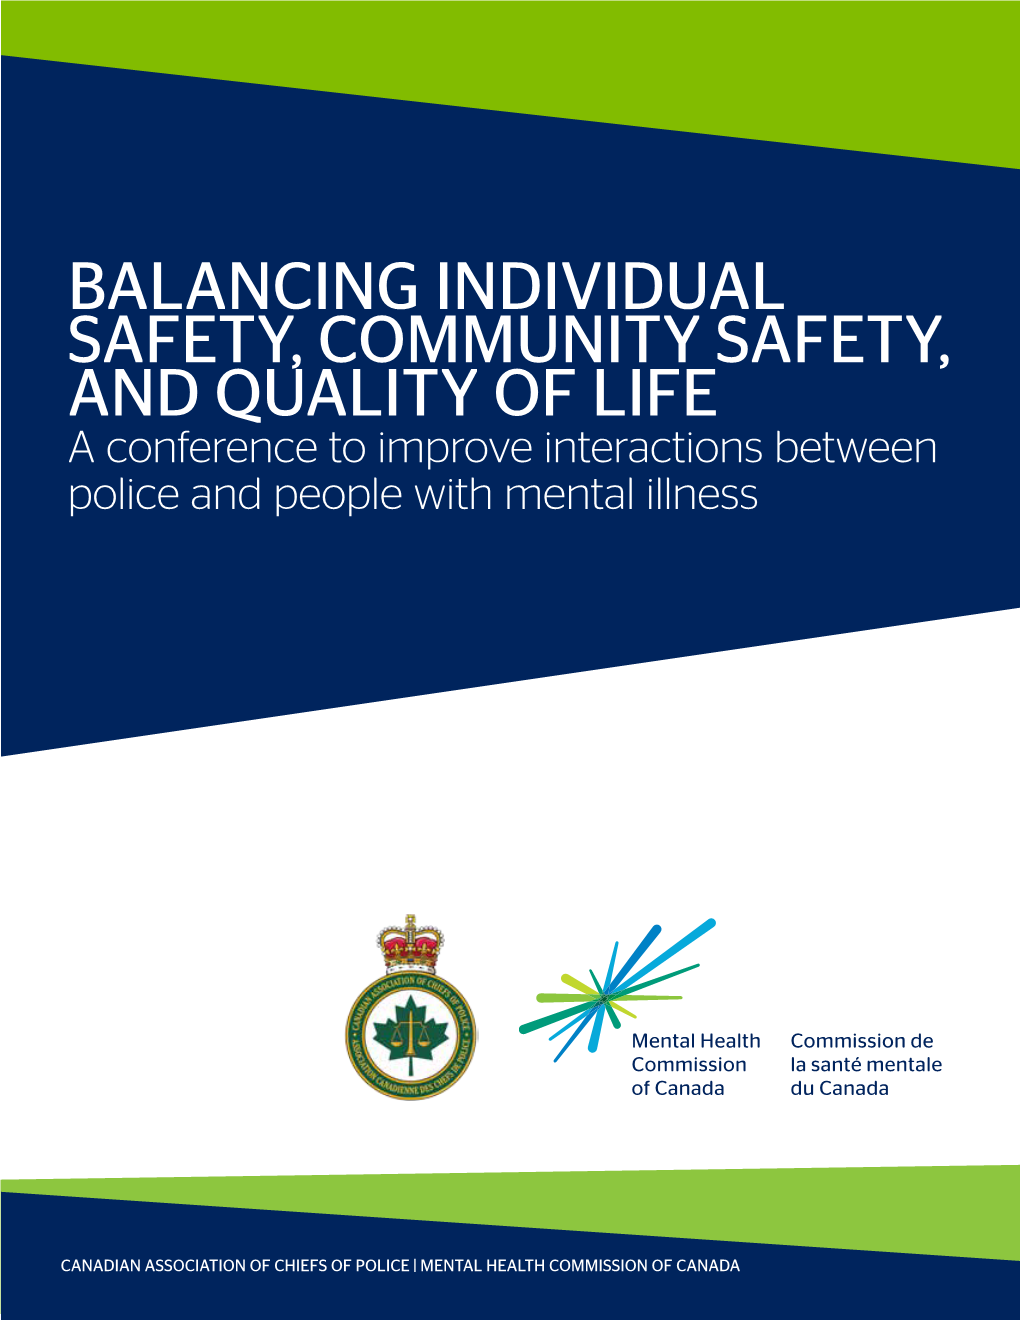 BALANCING INDIVIDUAL SAFETY, COMMUNITY SAFETY, and QUALITY of LIFE a Conference to Improve Interactions Between Police and People with Mental Illness